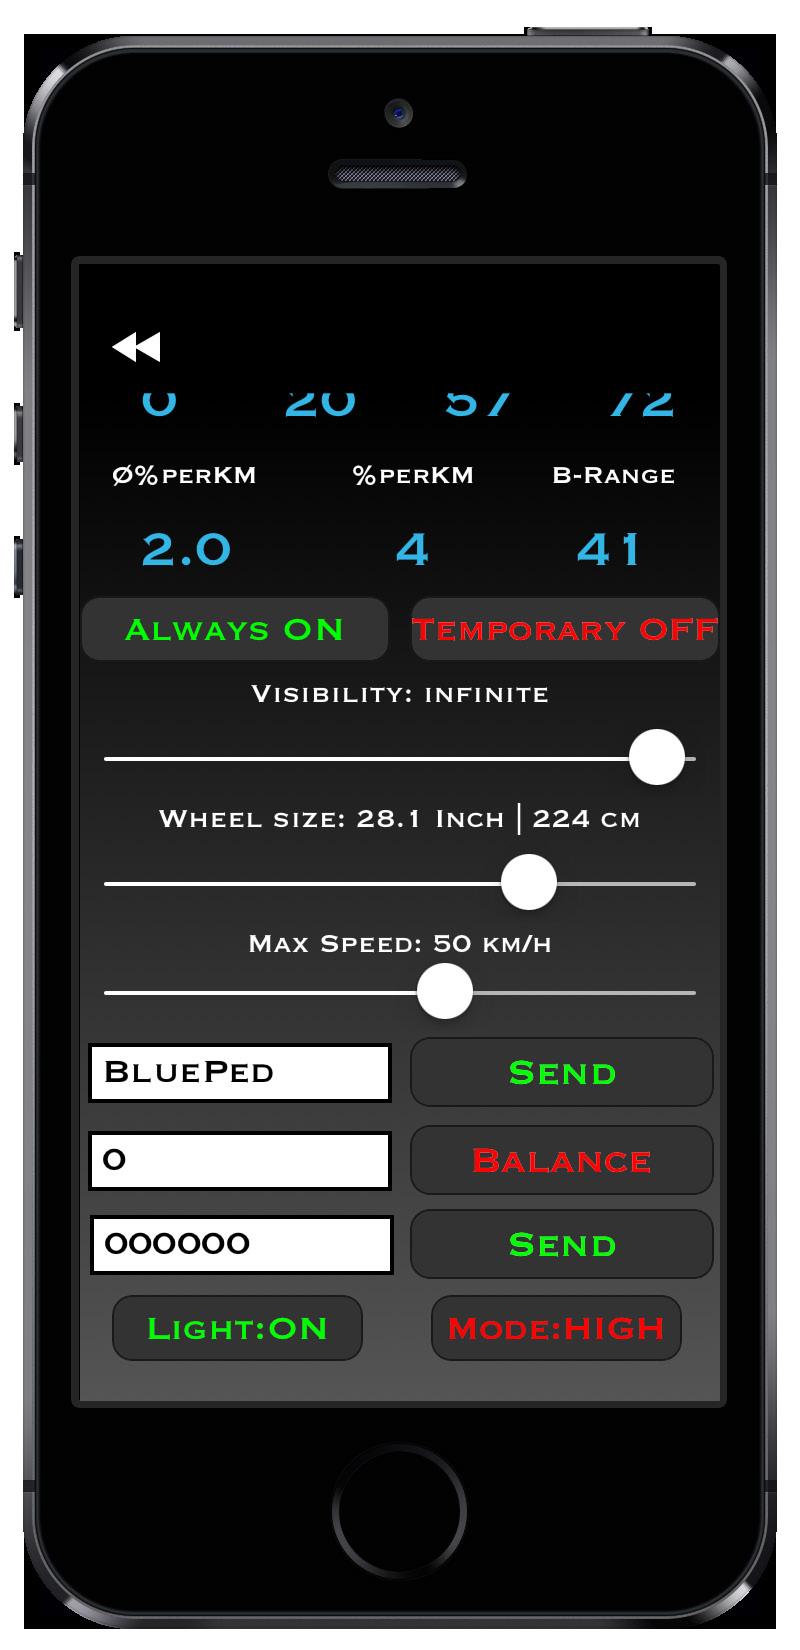 Visibility: Can be set to values between 0 and 240 seconds or infinite. If visibility is set to 0, the app will no longer be able to find the module after disconnecting or restarting the E-Bike.